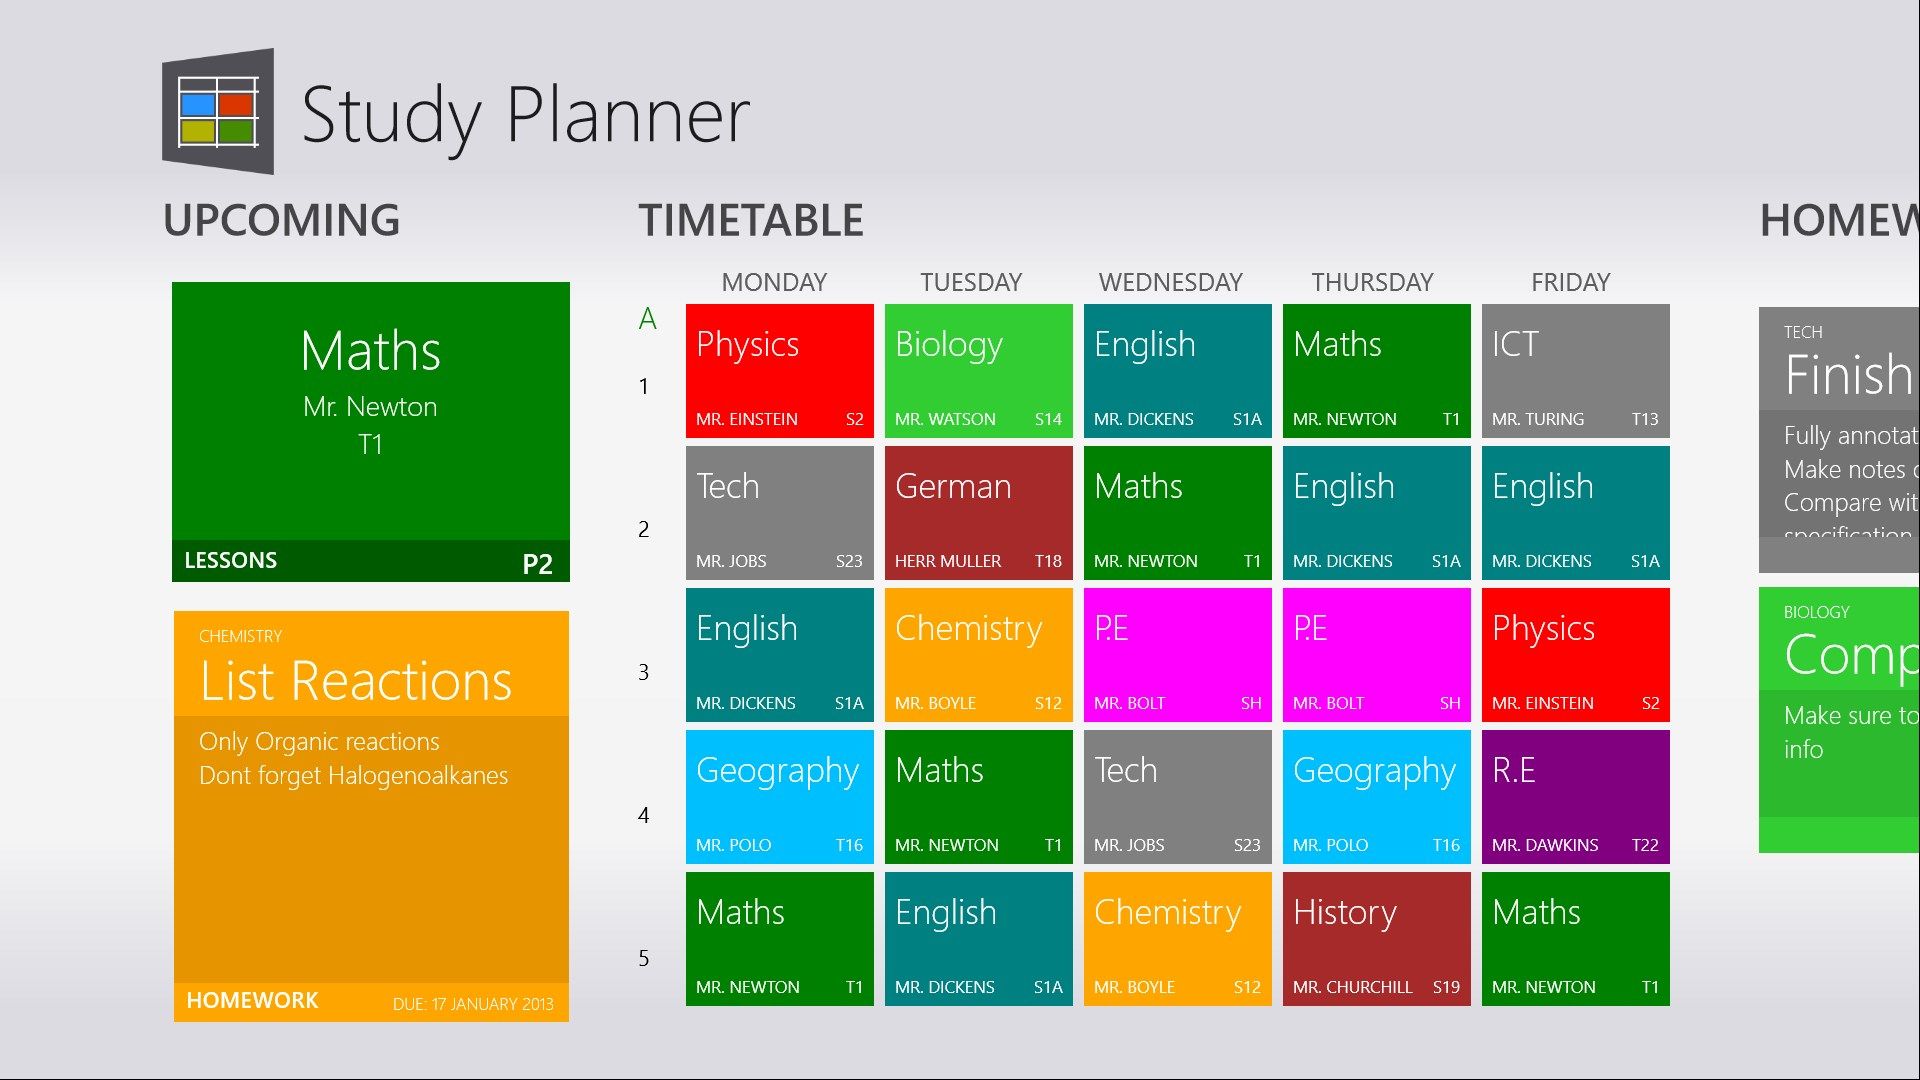 The home page of Study Planner